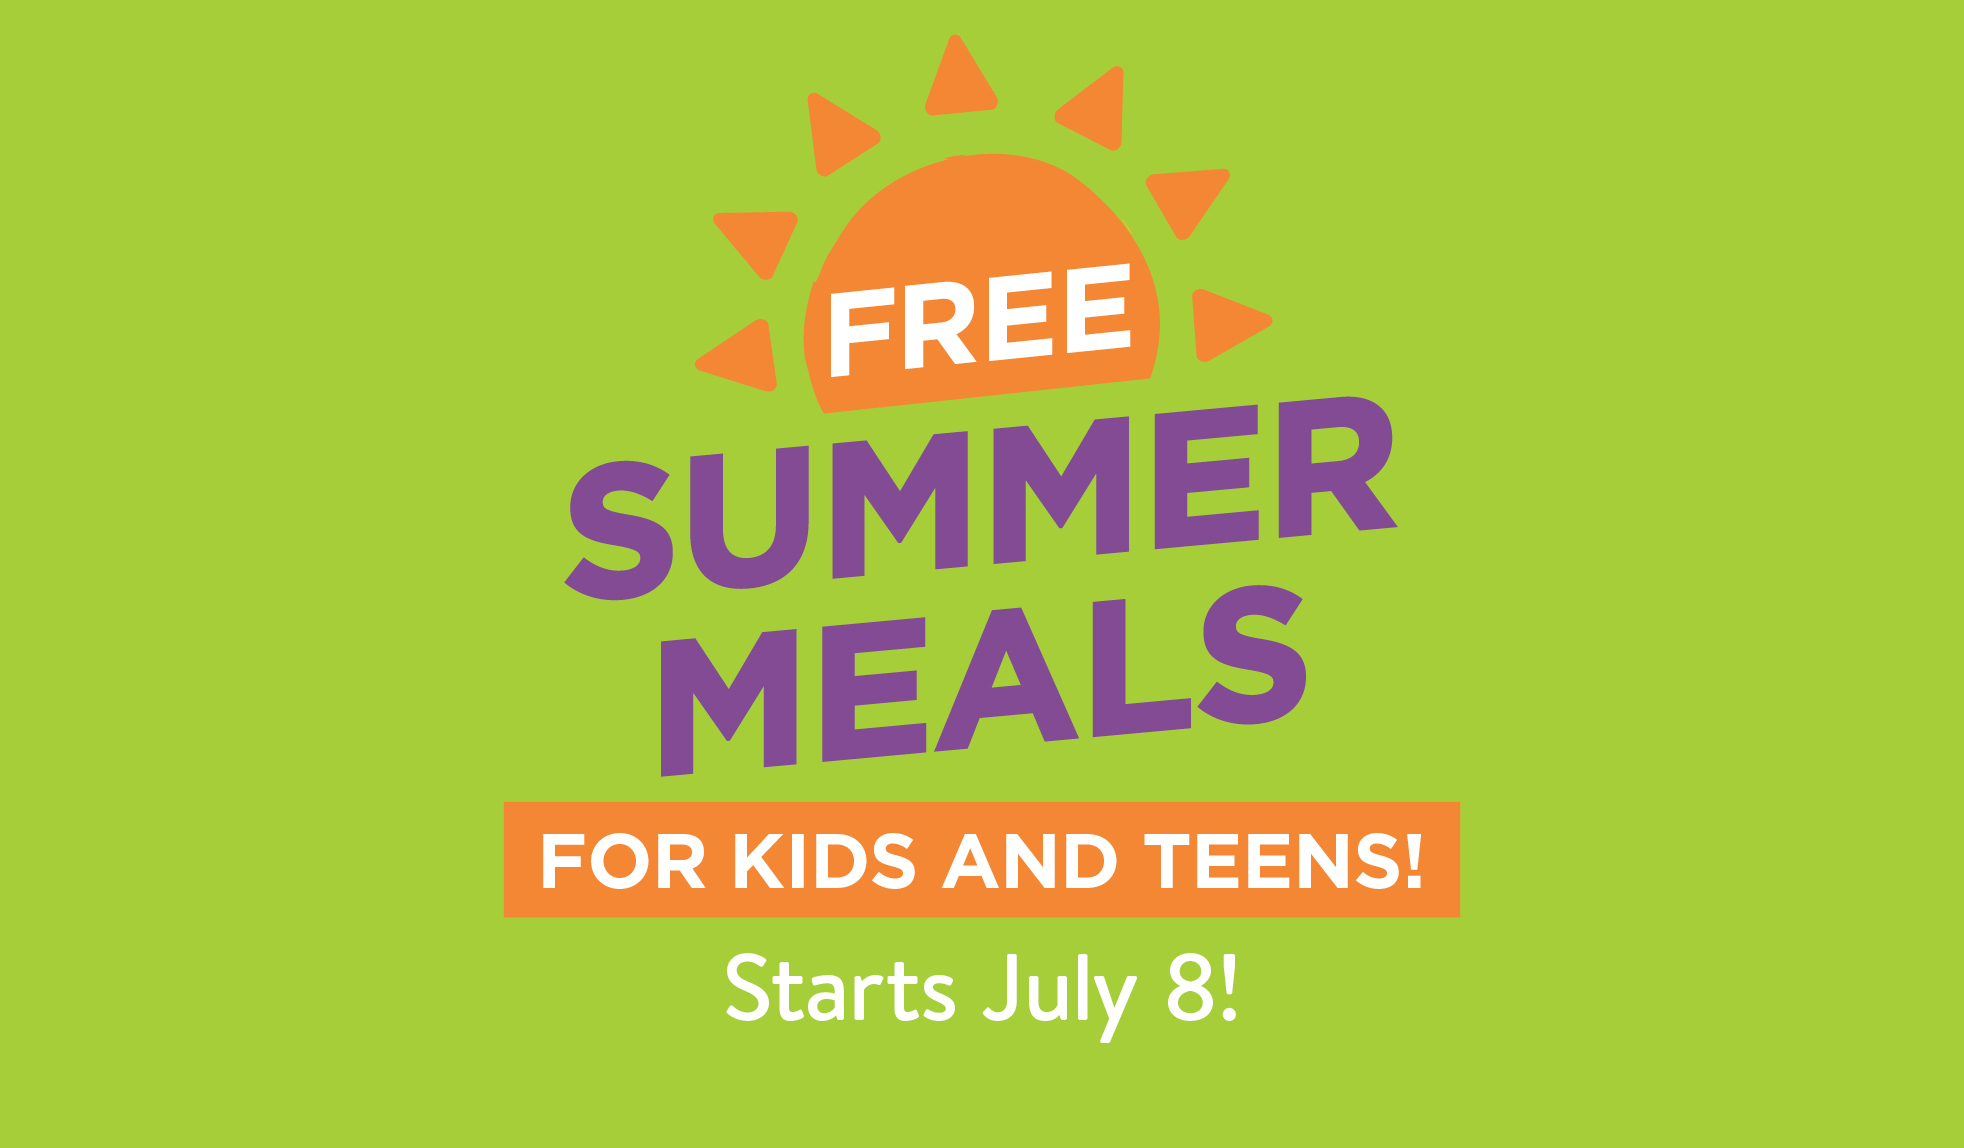 Starting Monday, July 8, we will provide FREE lunches for kids and teens all summer long.